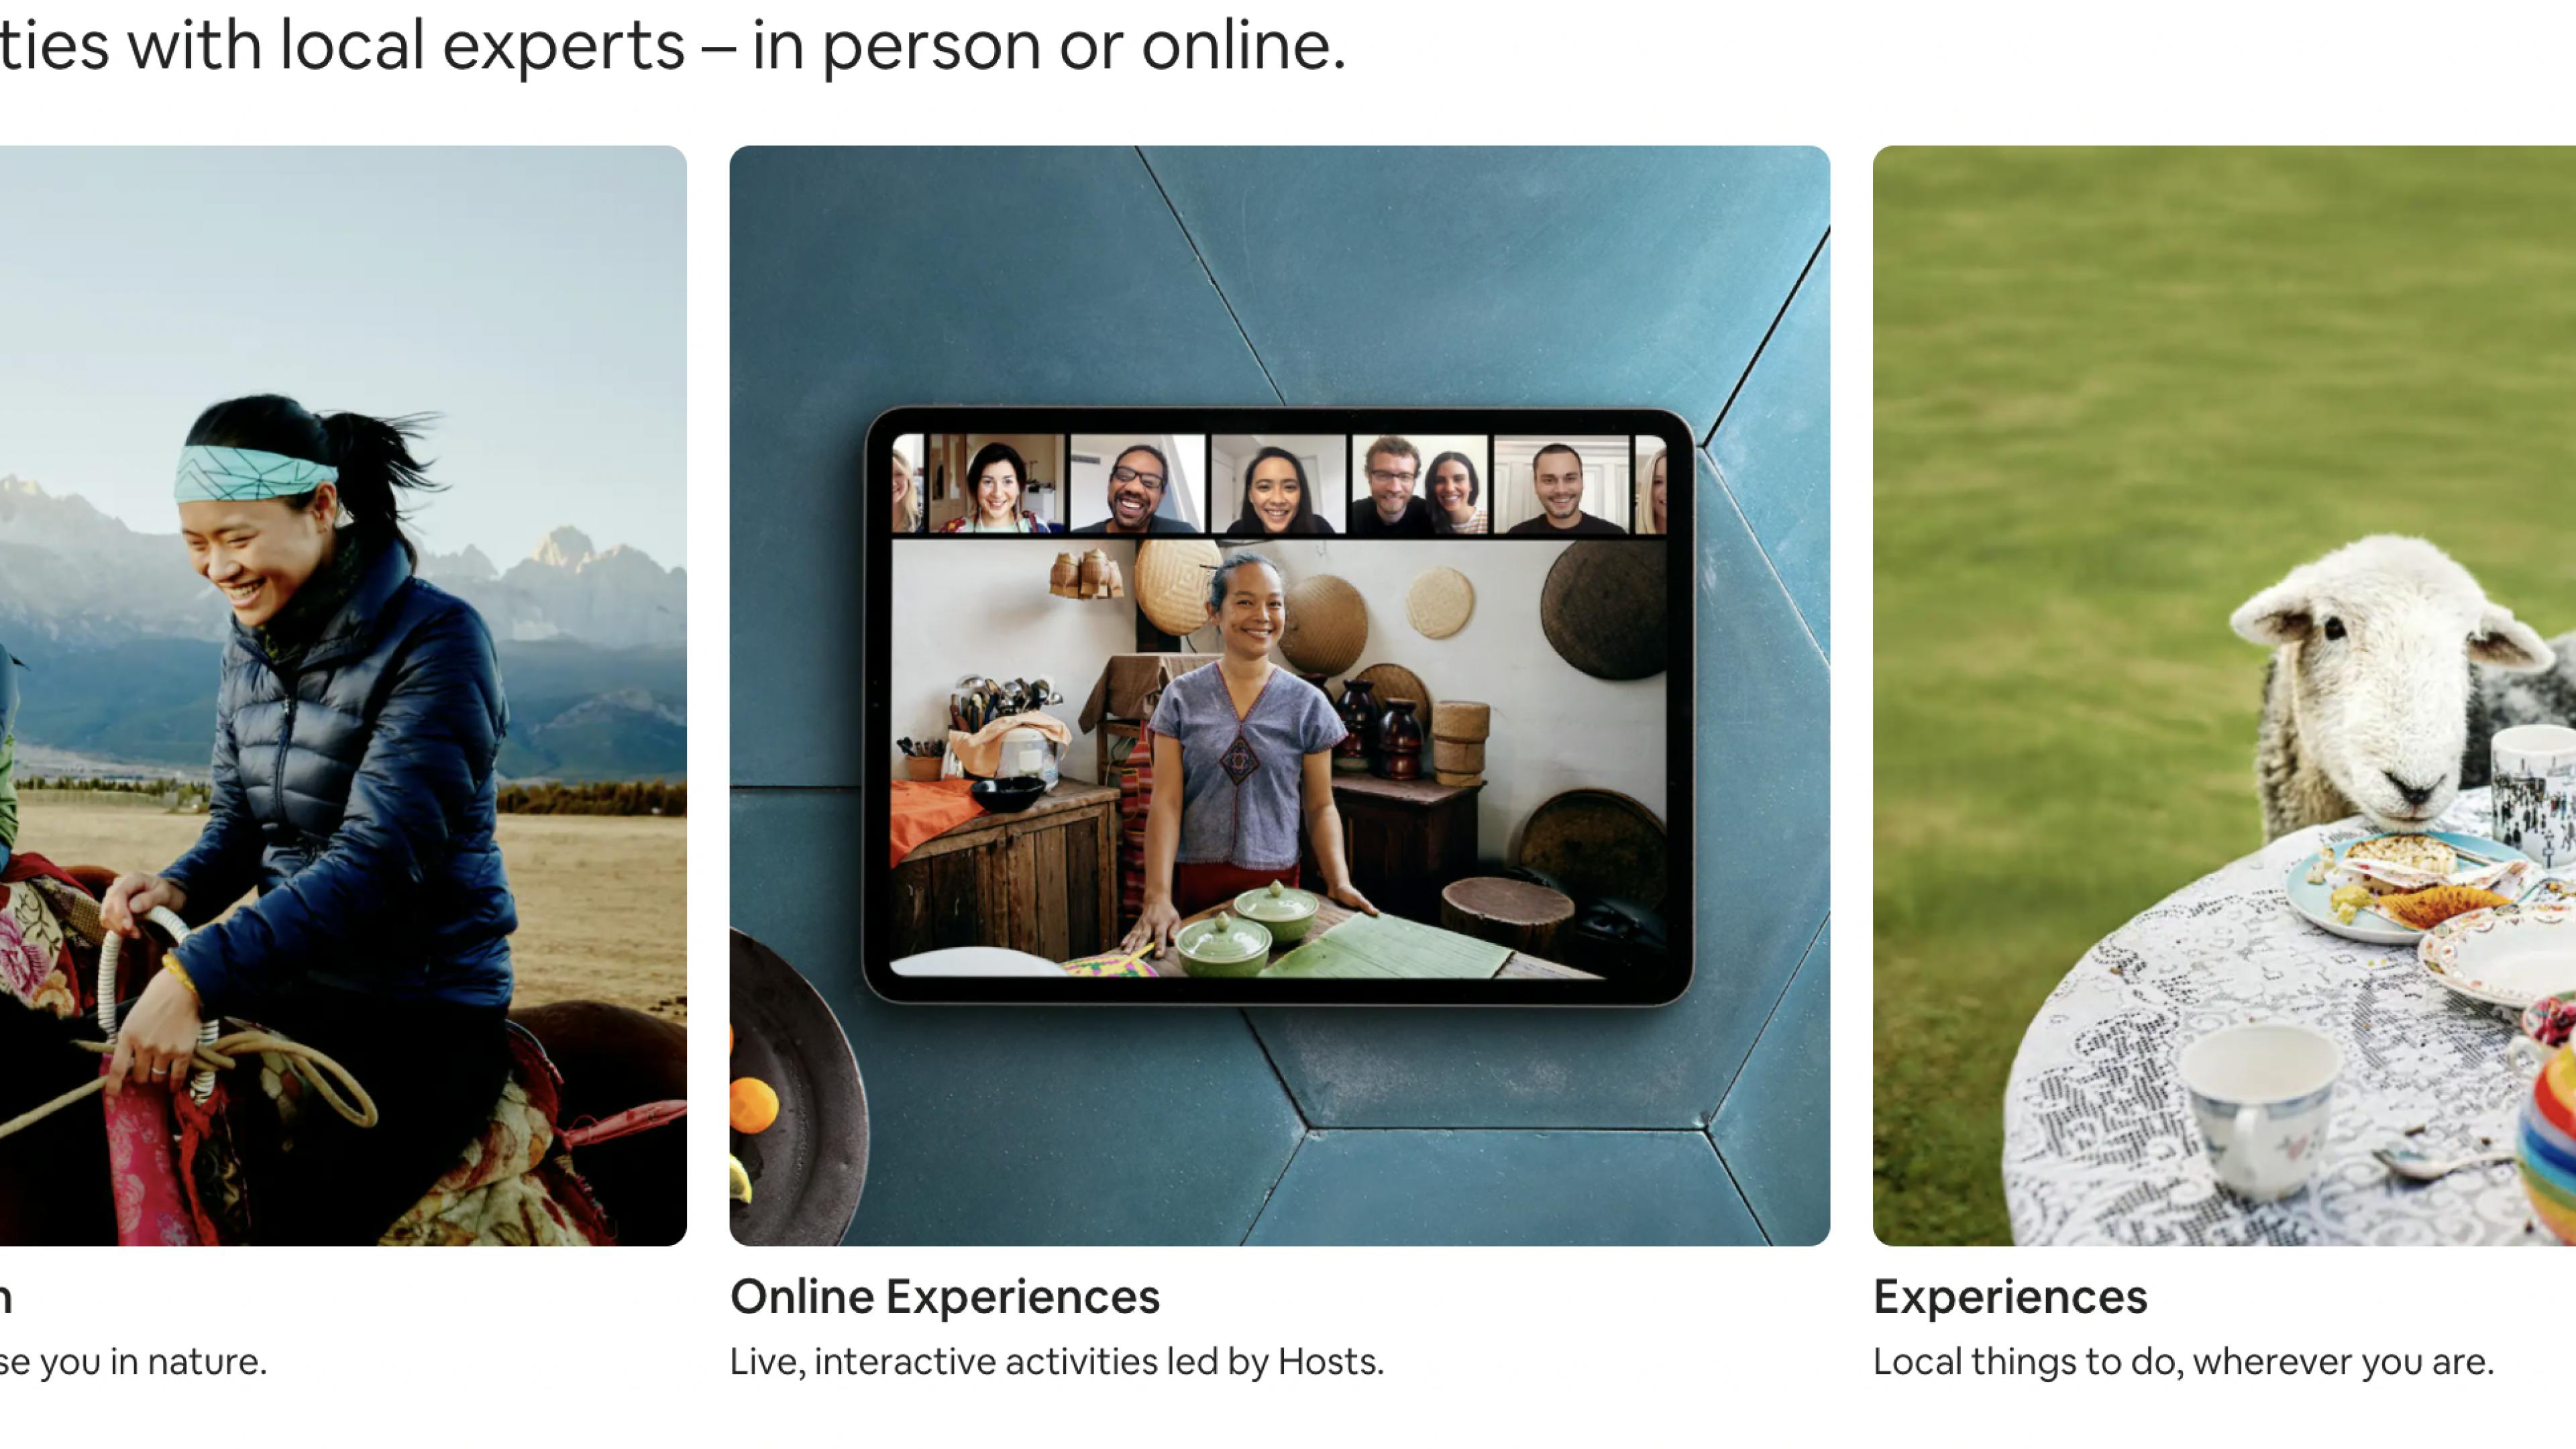 A screenshot from Airbnb that shows a photograph of an online class on an iPad. It’s labelled ‘Online Experiences